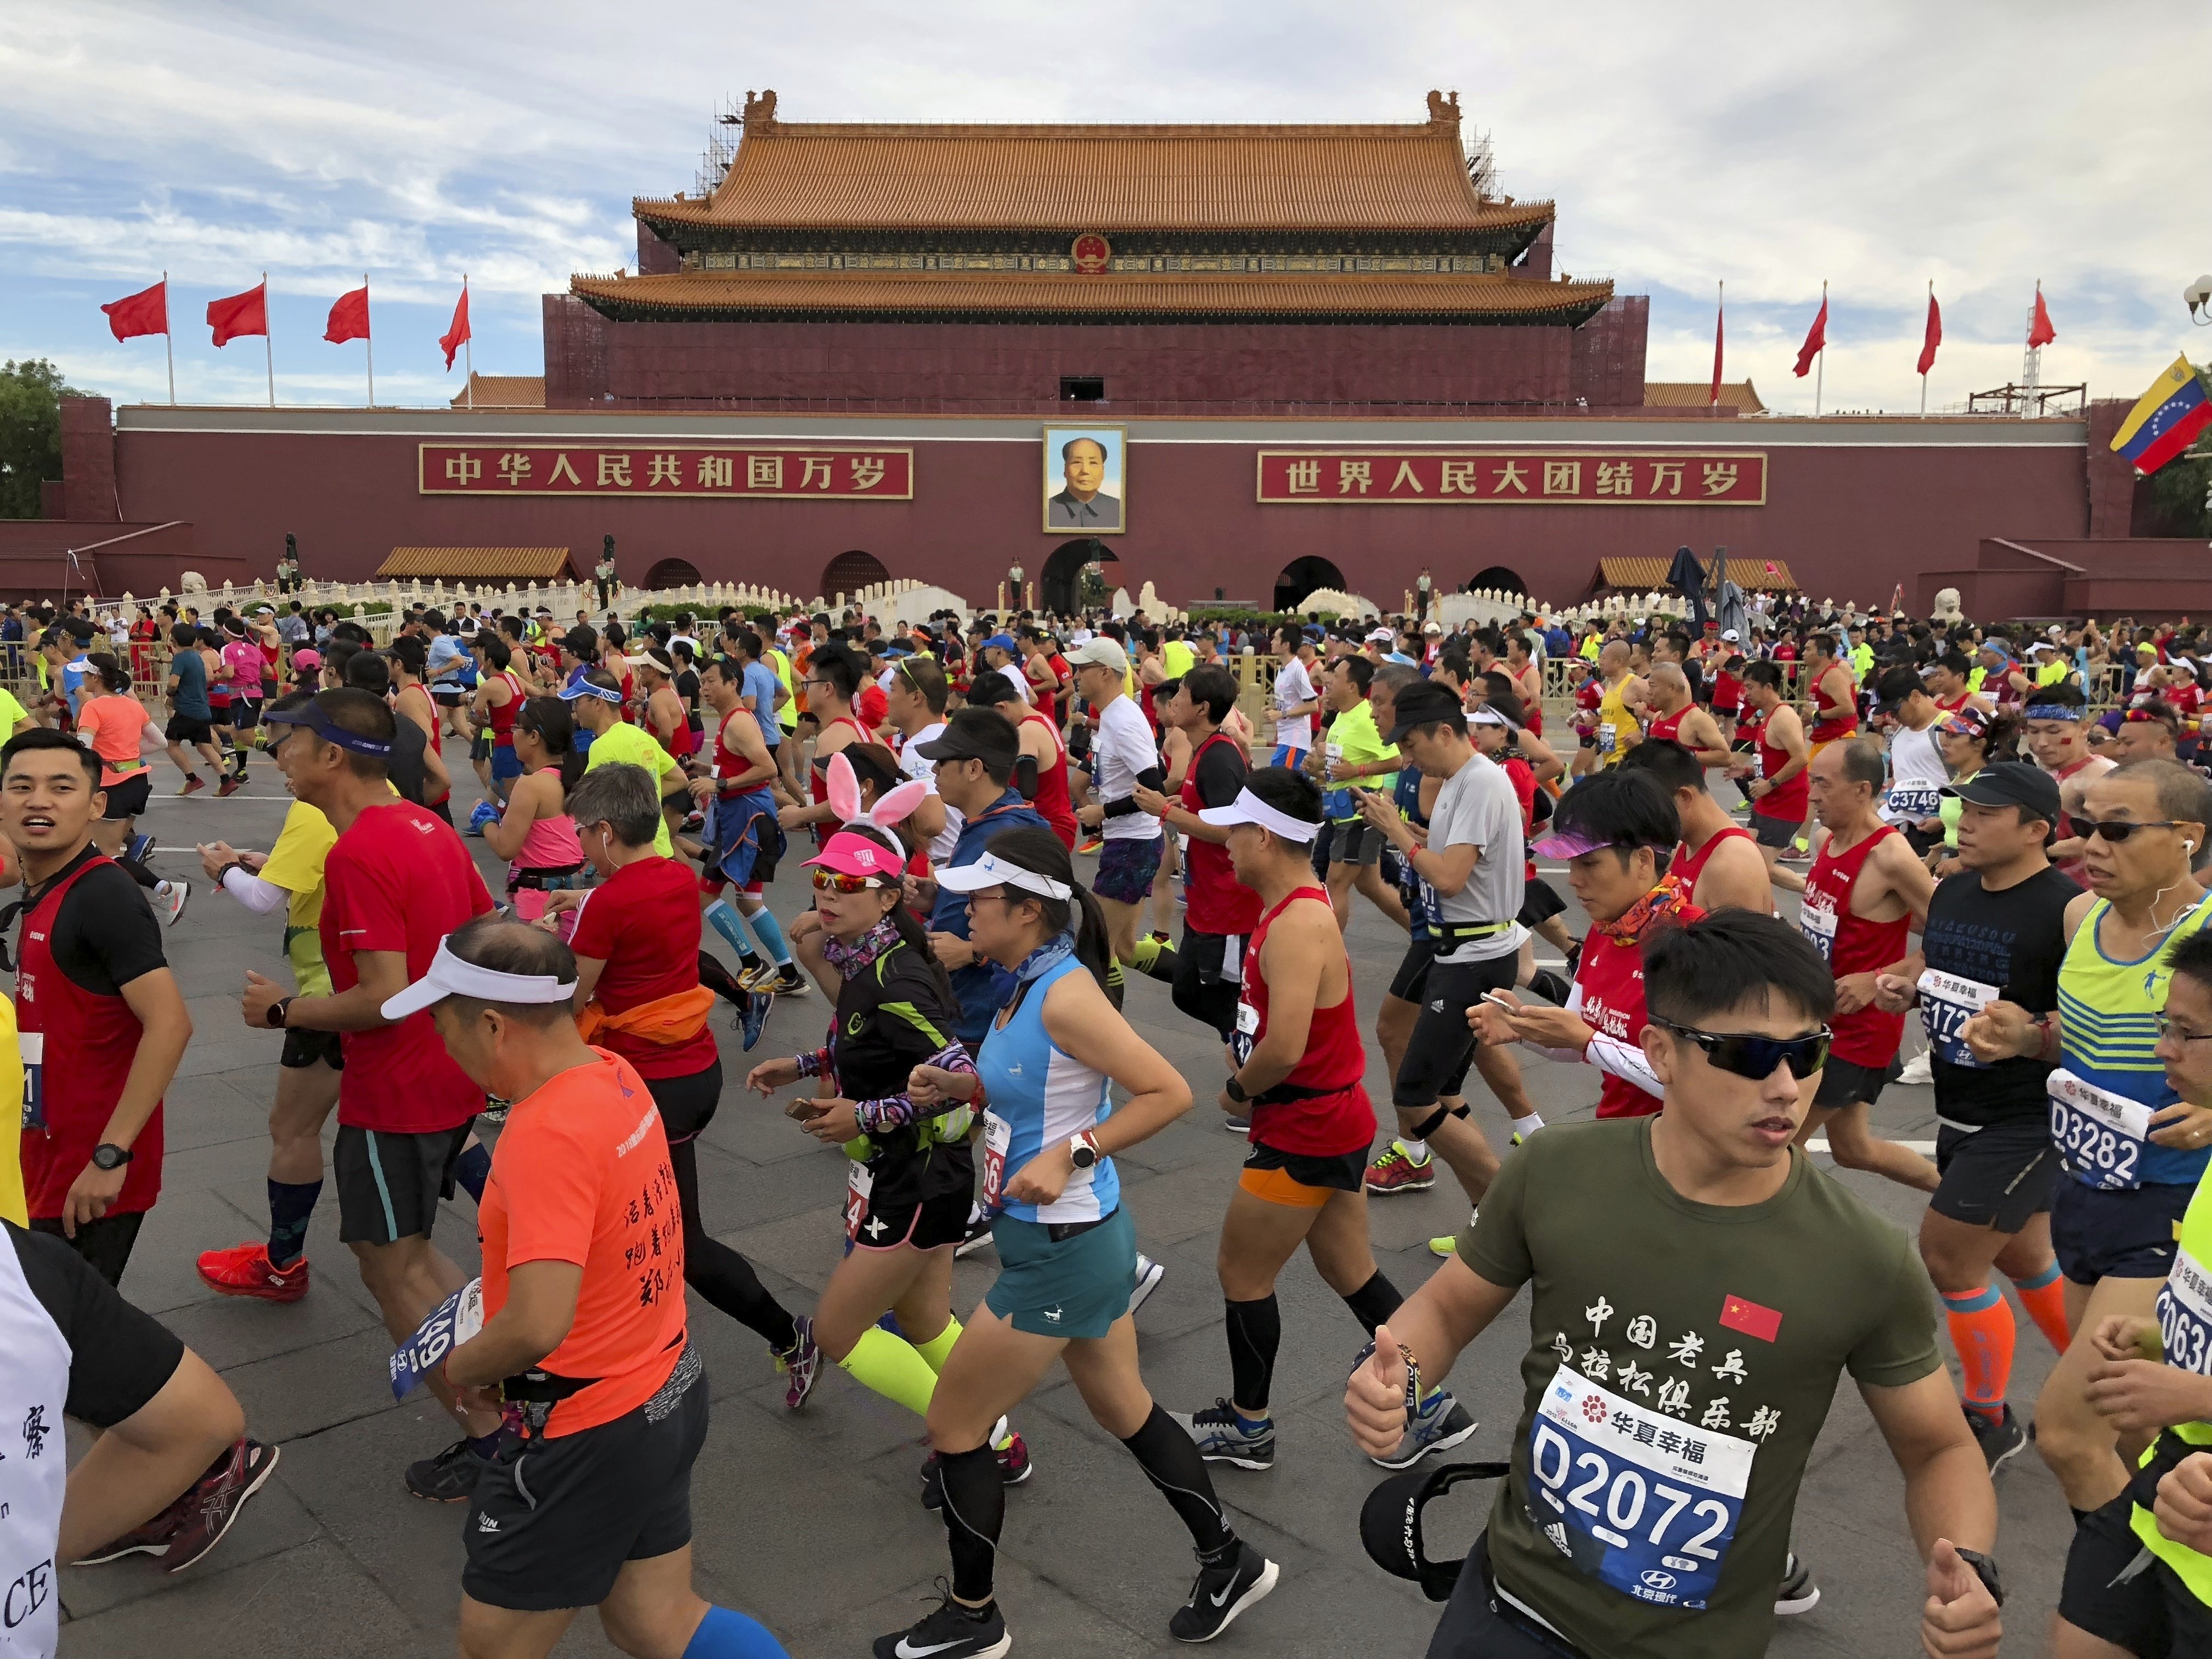 Runners pass near the large portrait of Chinese leader Mao Zedong on Tiananmen Gate near Tiananmen Square at the start of the Beijing Marathon on September 16, 2018. Photo: AP